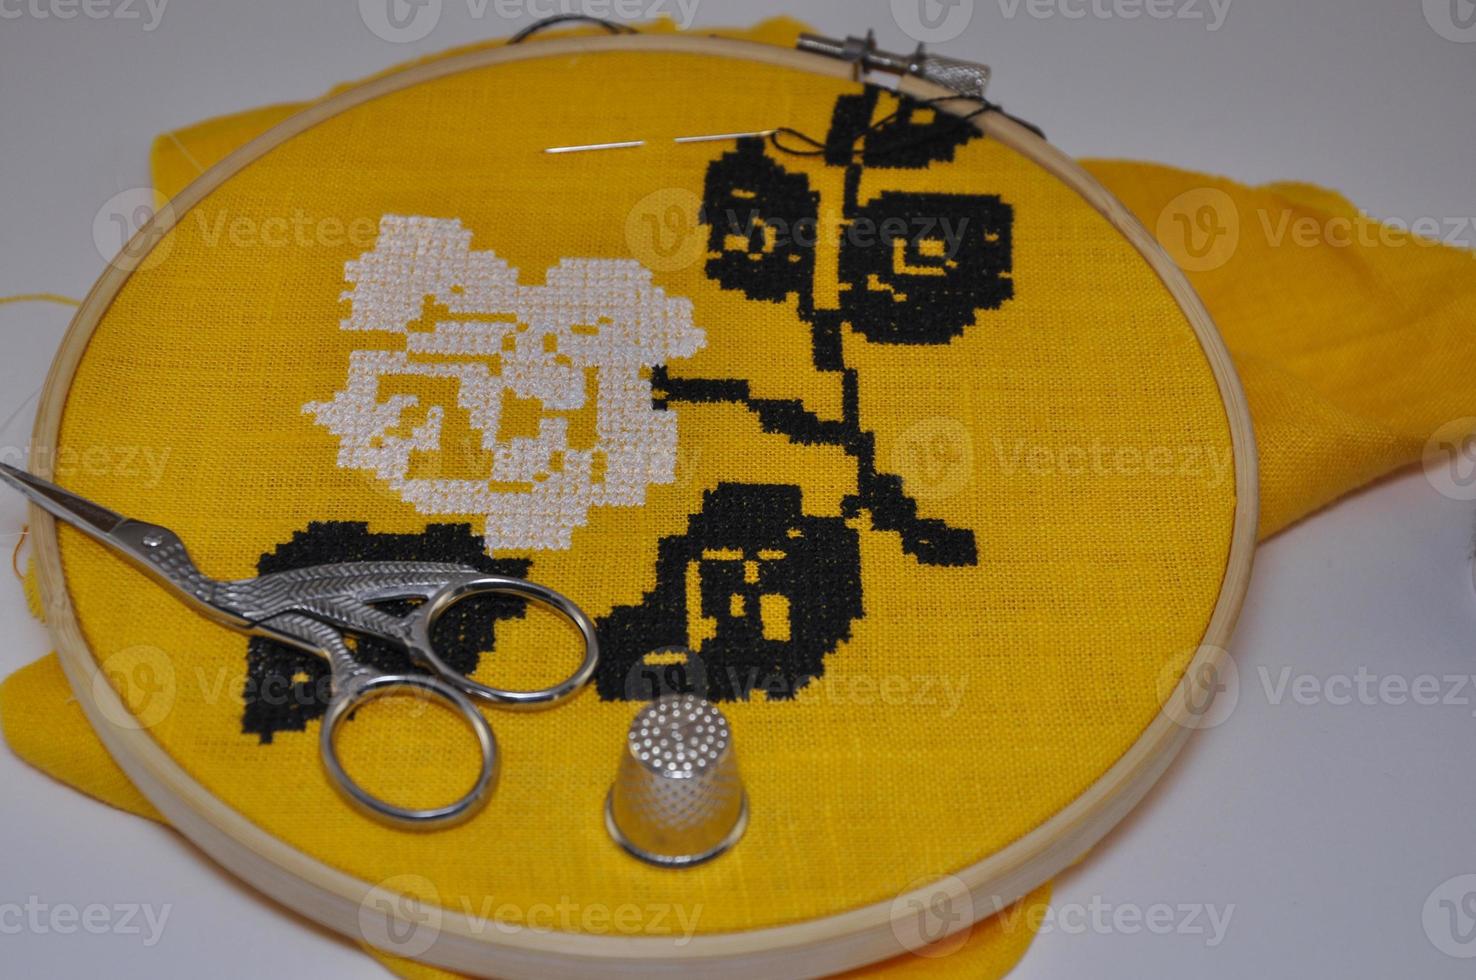 Sewing and embroidery craft kit, selective focus photo